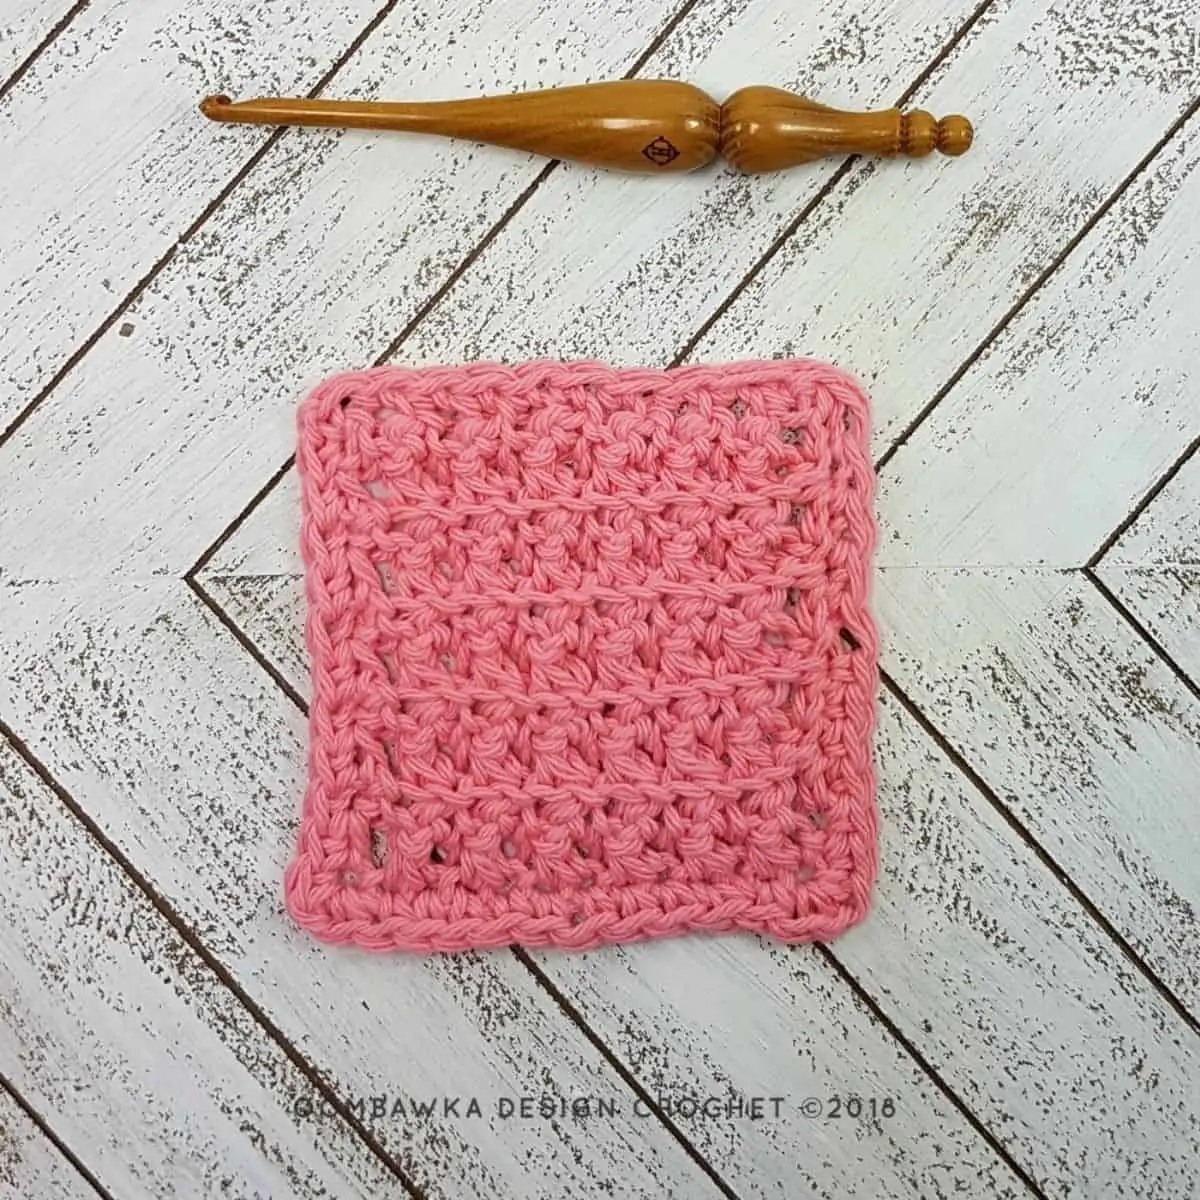 small pink square crochet stitches swatch laying flat next to a wooden crochet hook